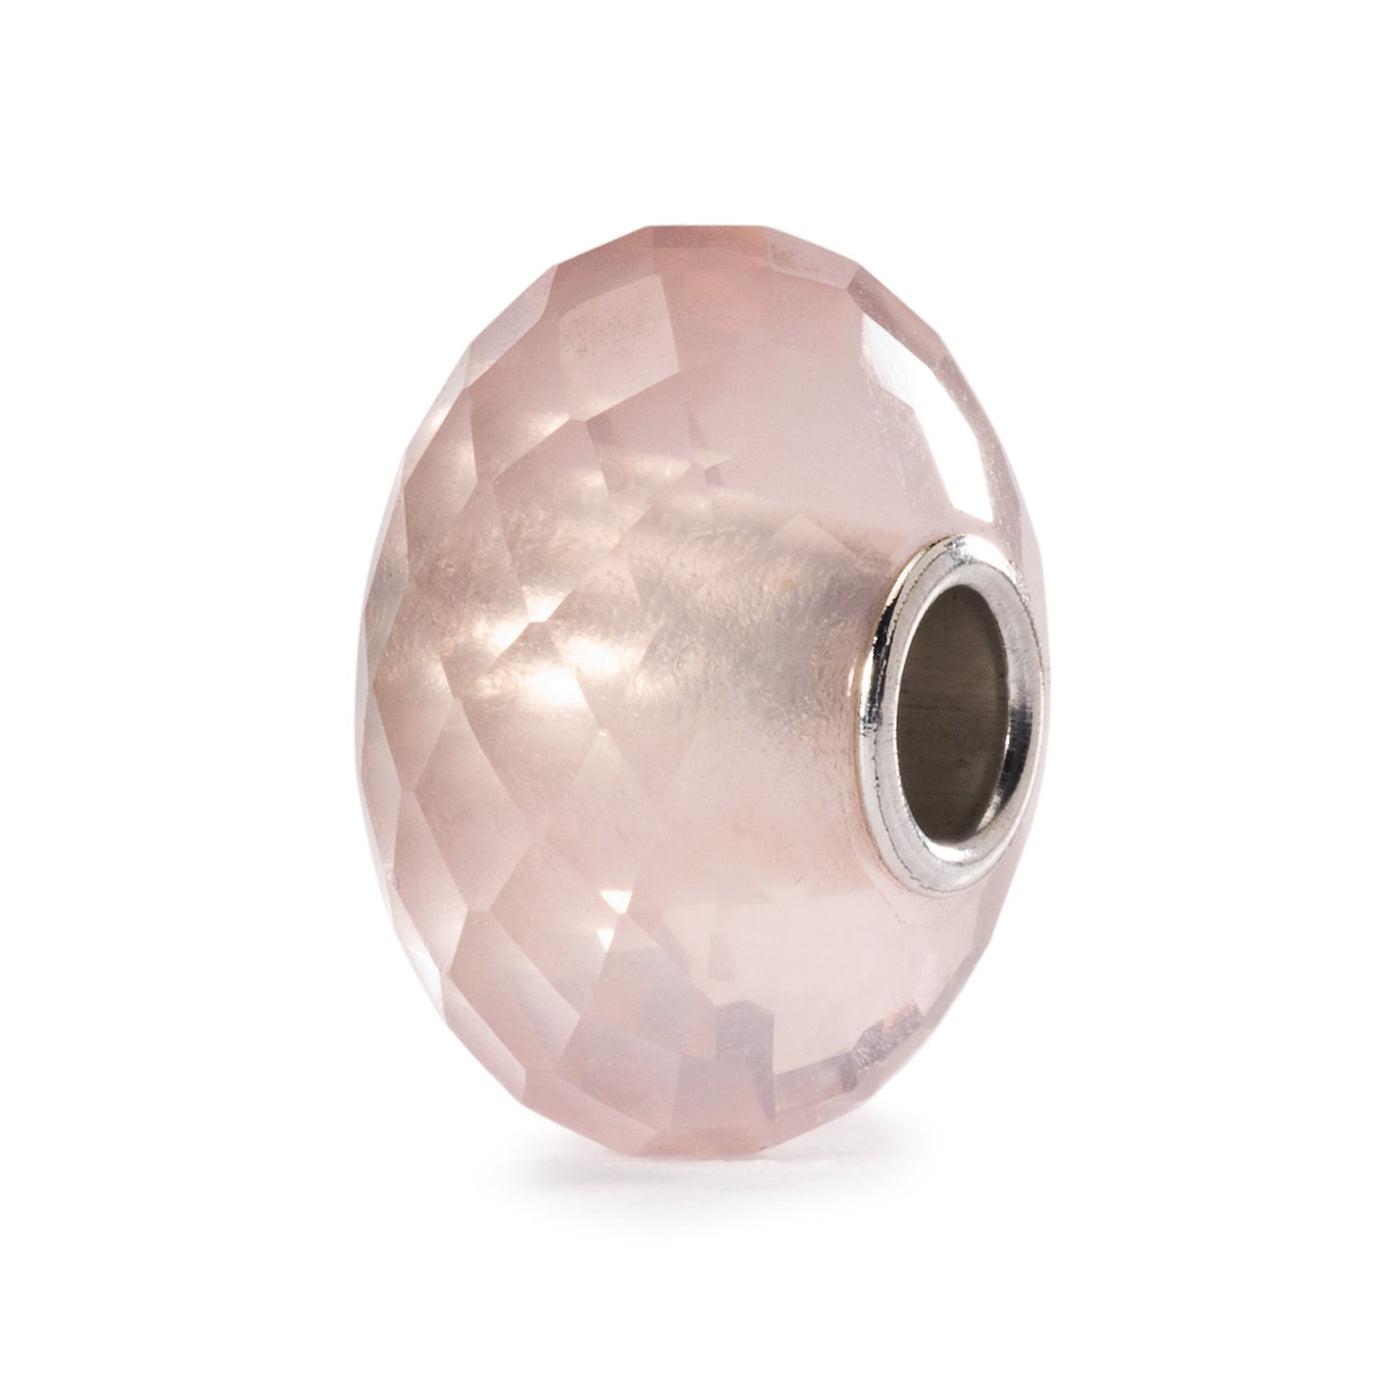 Rose Quartz Bead, featuring a stunning, translucent rose quartz gemstone, with silver core, perfect for adding a touch of love and peace to your Trollbeads jewelry.